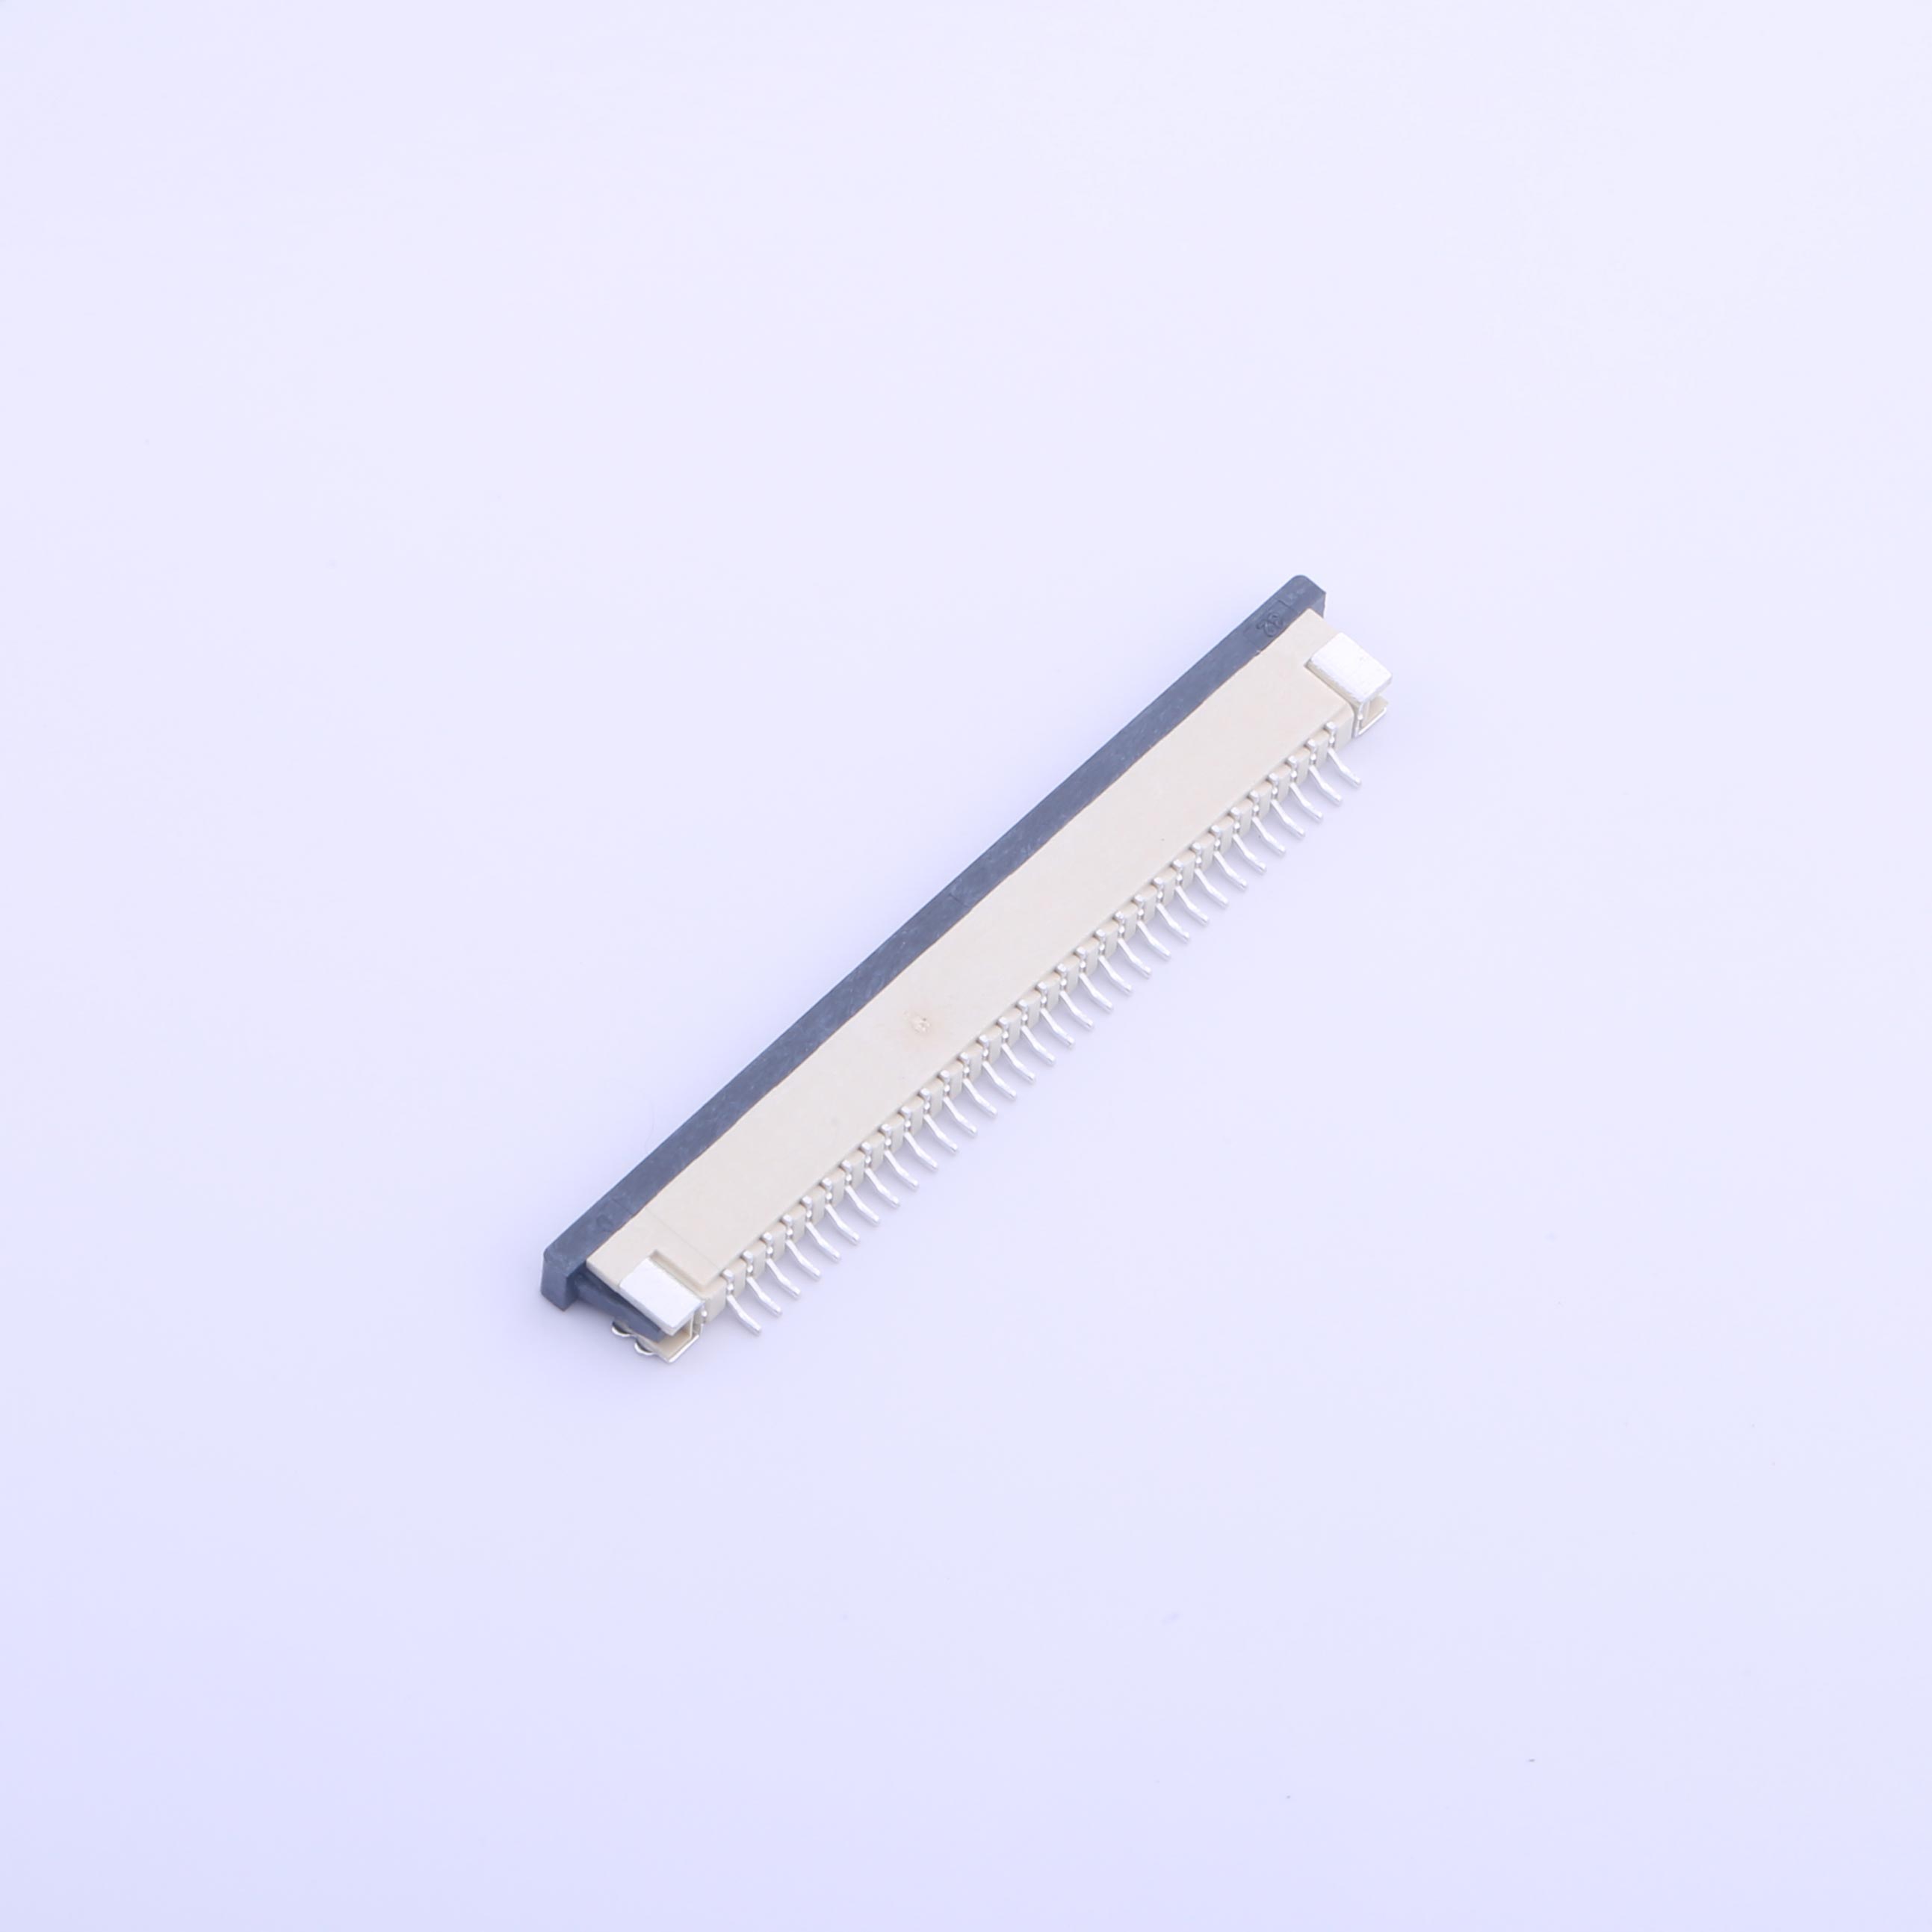 Kinghelm FFC/FPC Connector 32P Pitch 1mm - KH-CL1.0-H2.5-32pin